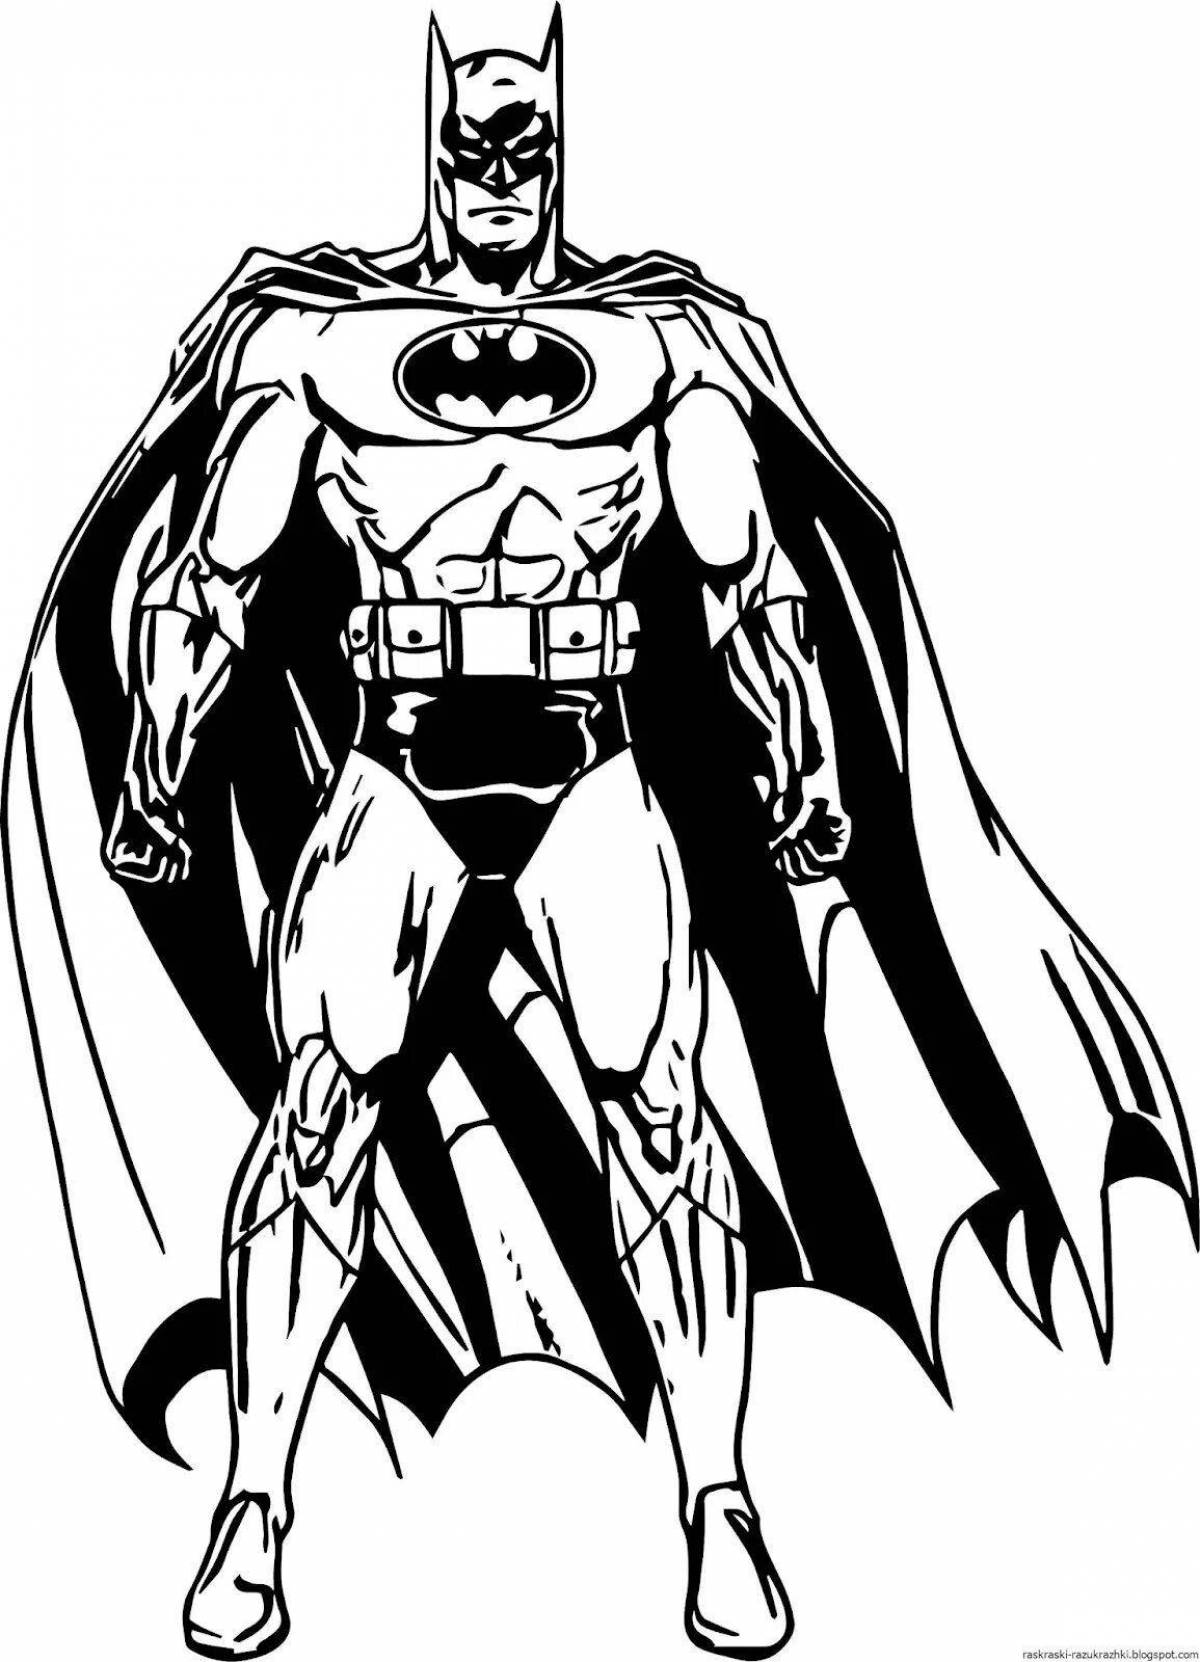 Glorious dark knight coloring page